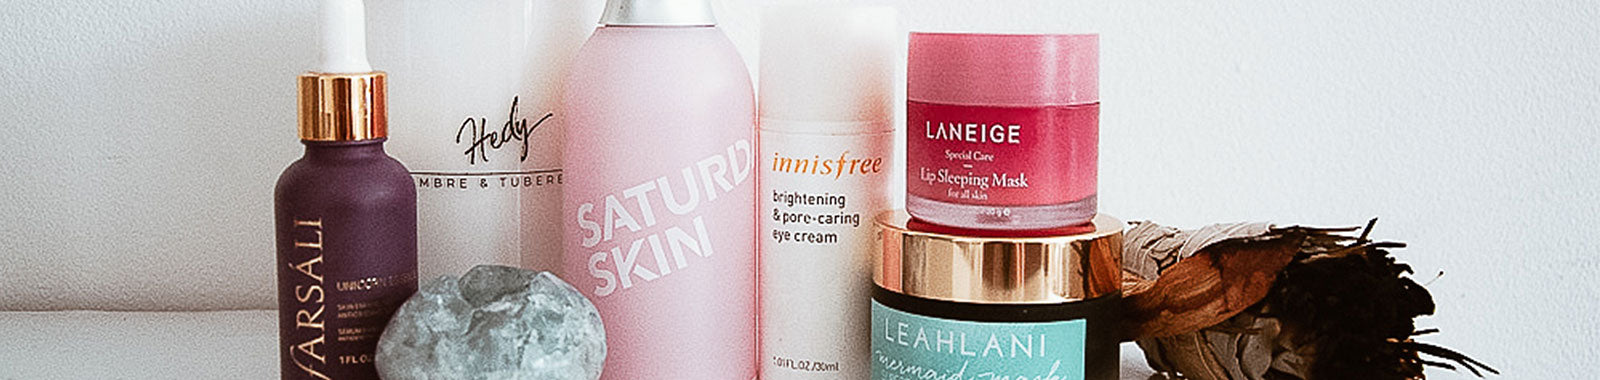 5 Products To Transition Your Beauty Routine To Fall